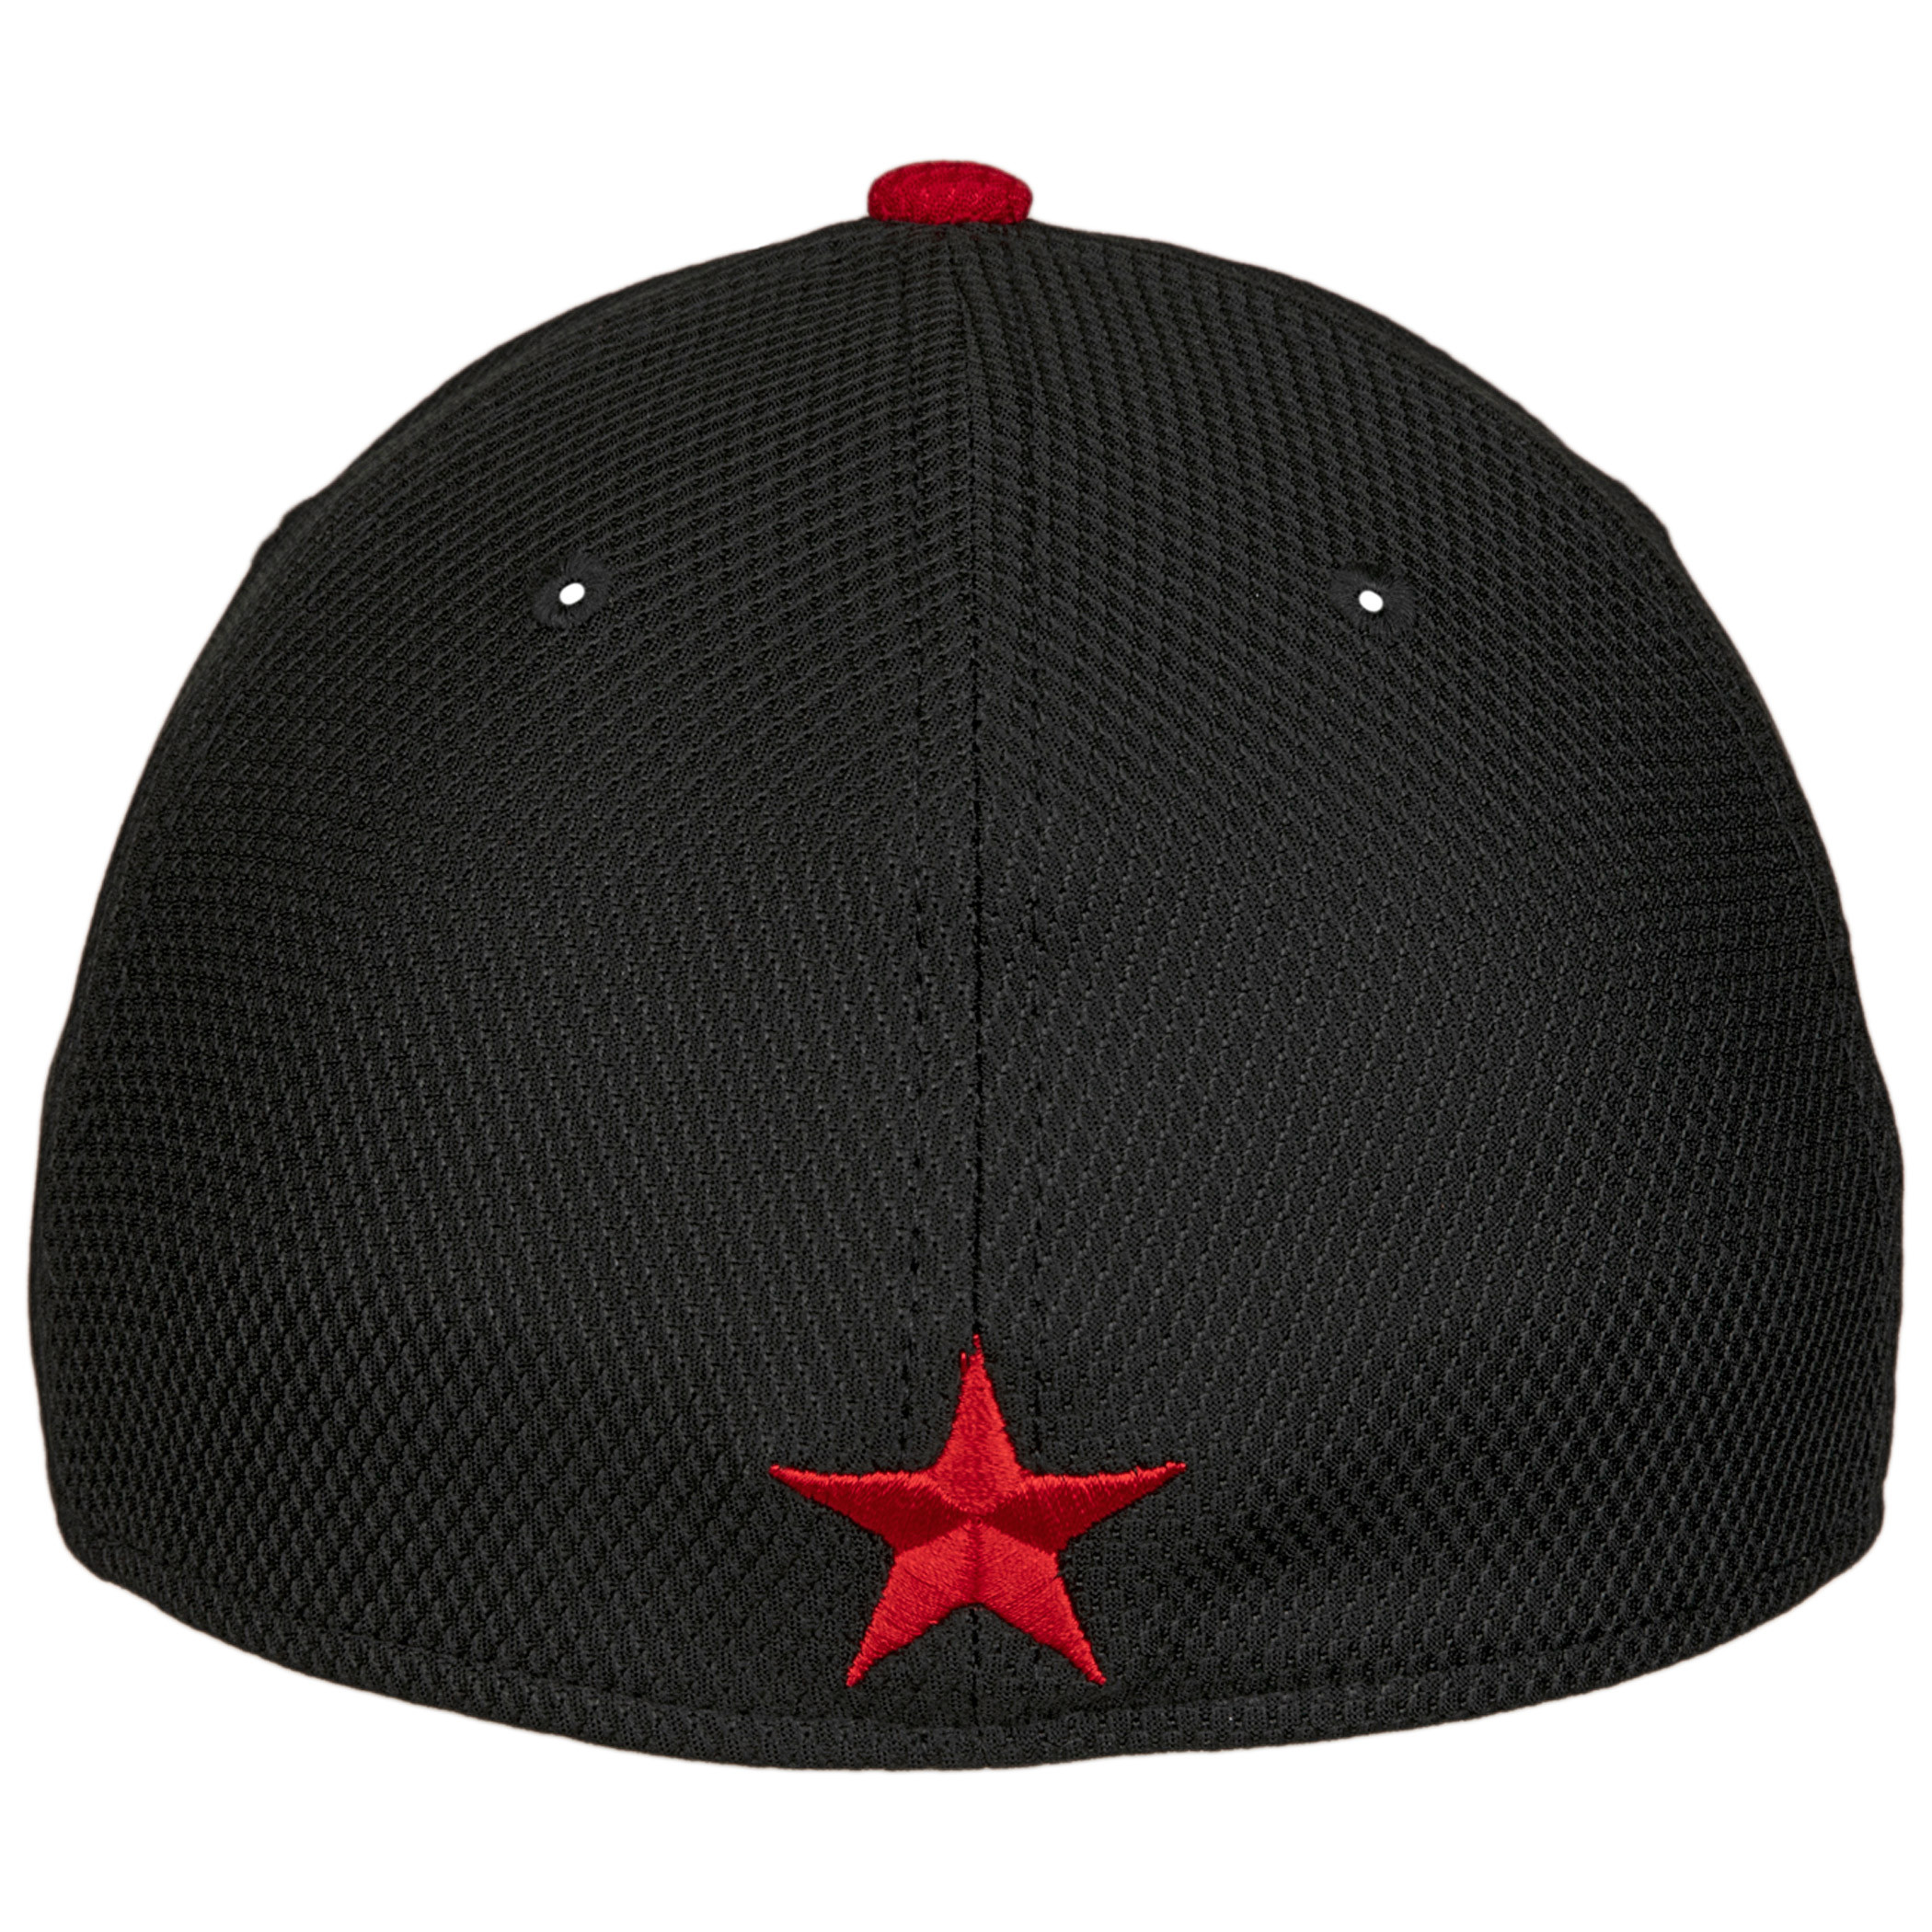 The Winter Soldier Classic Symbol New Era 39Thirty Flex Fitted Hat